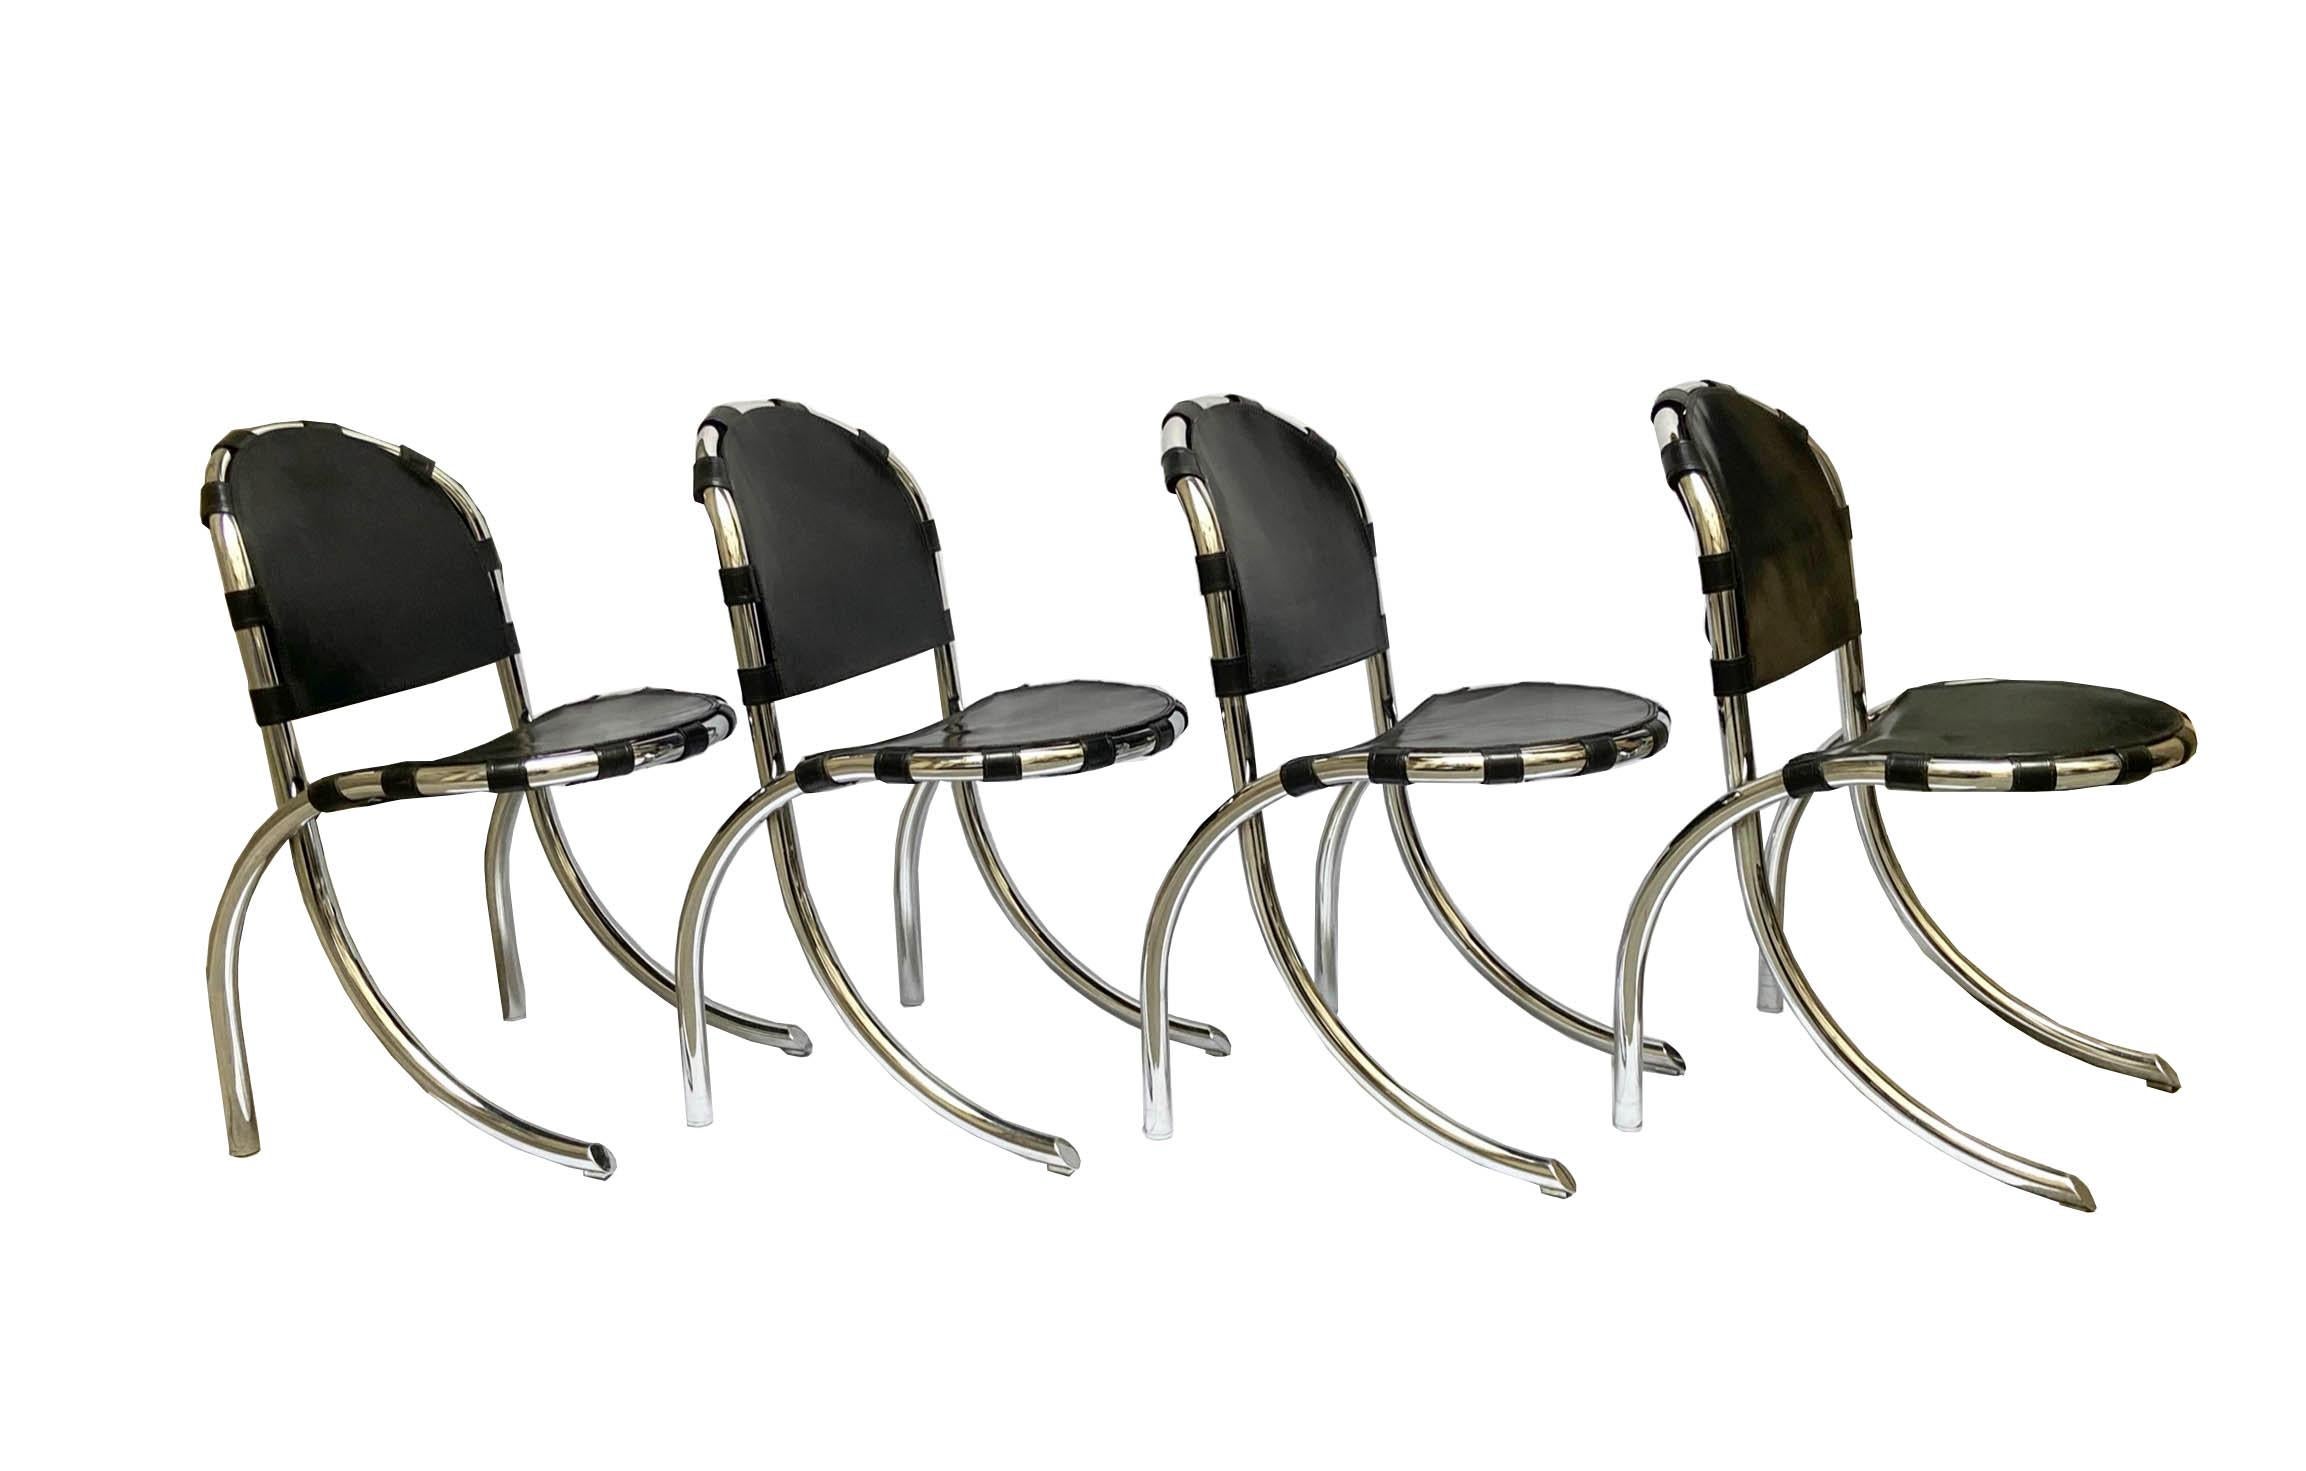 Four Italian chairs from the 1960s-1970s. 
Medusa model chairs in original steel by Tetrark design Bazzani. 
Fabulous furniture for interior decorators and collectors. 
Sittings e
leather backs with metal tie rods.